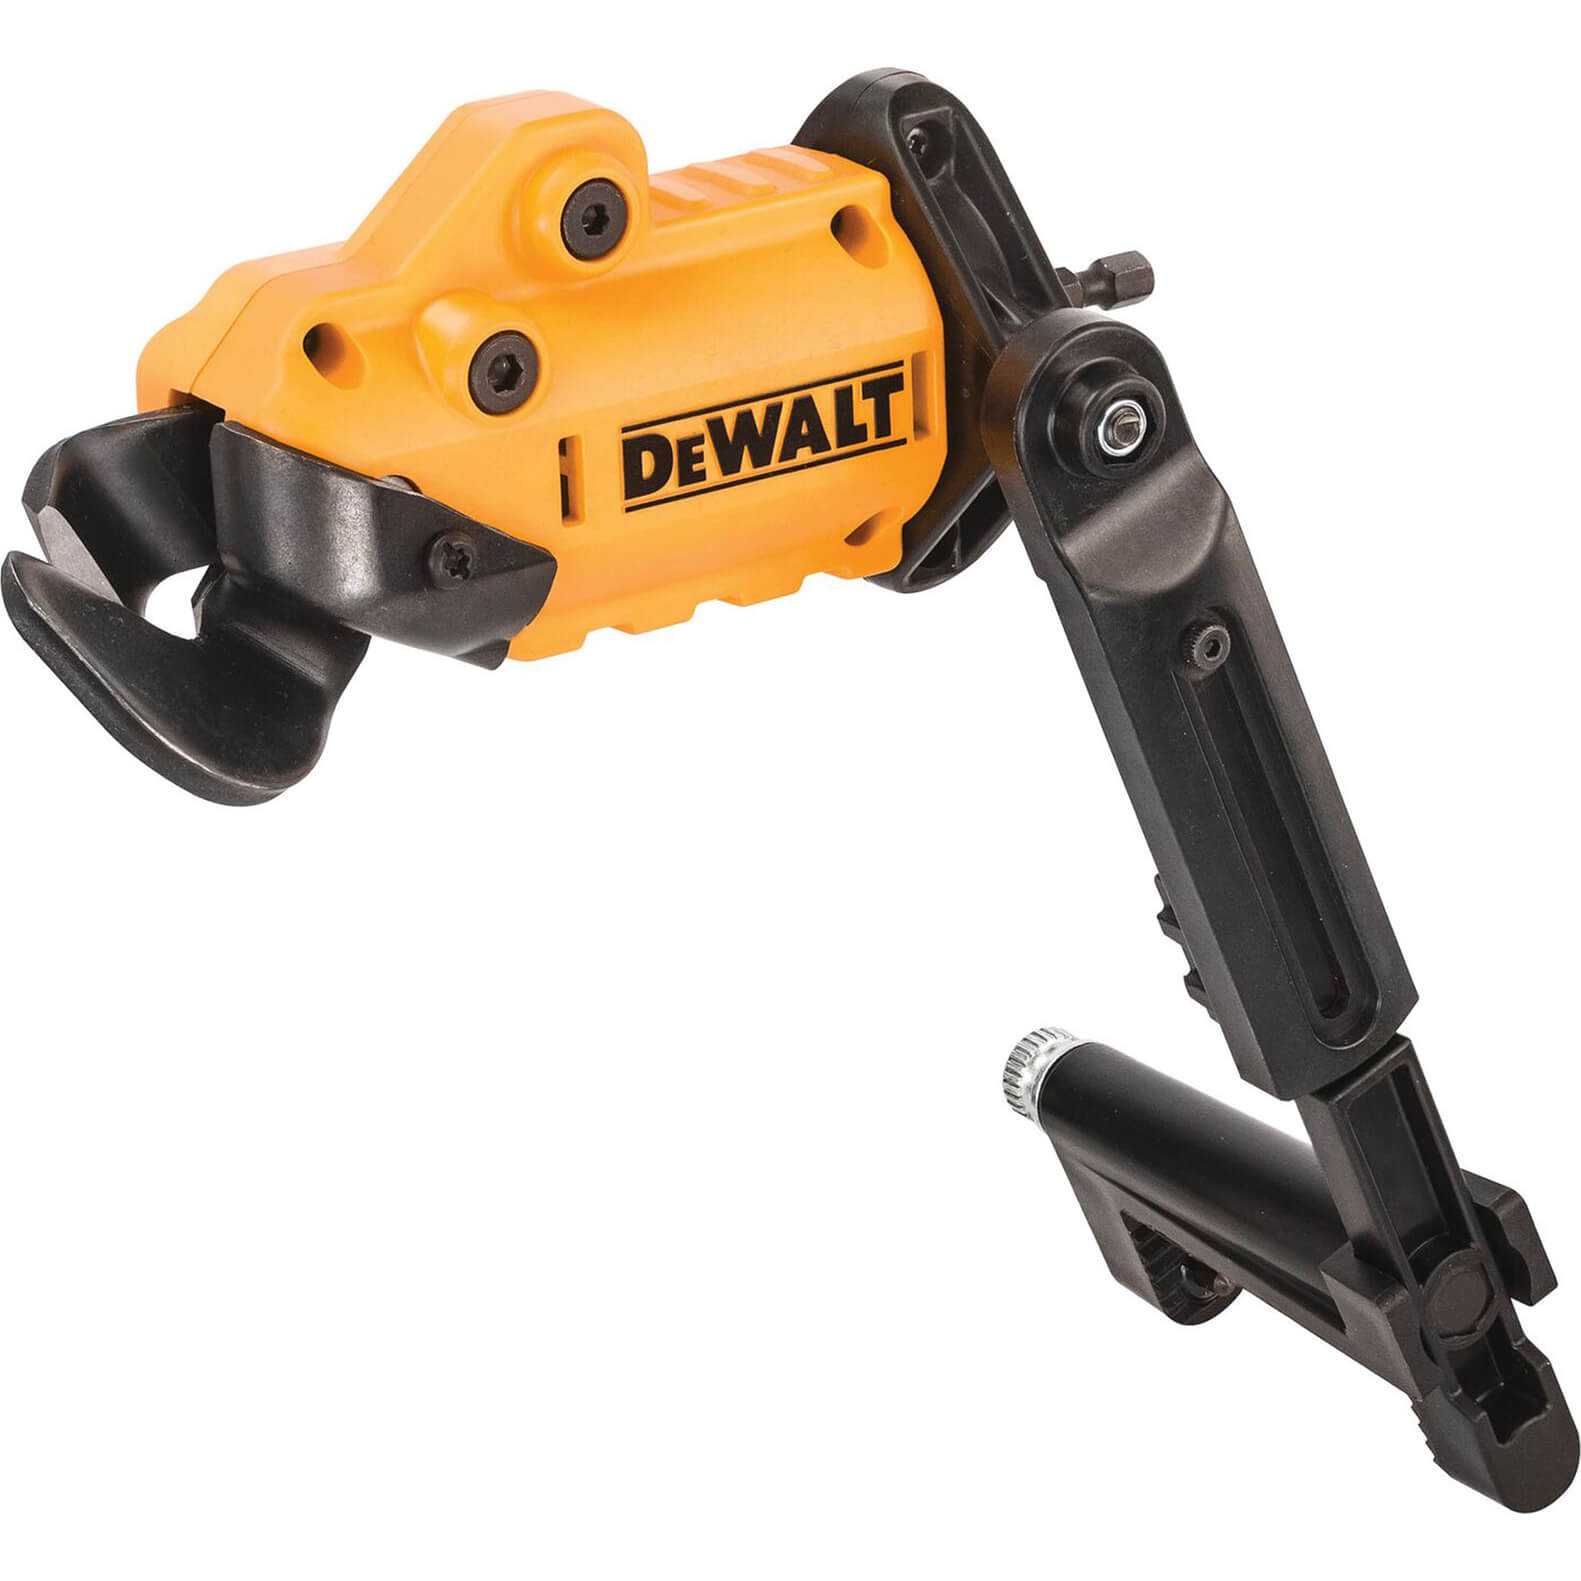 Image of DeWalt DT70620 Metal Cutting Shear Attachment for Impact Drivers